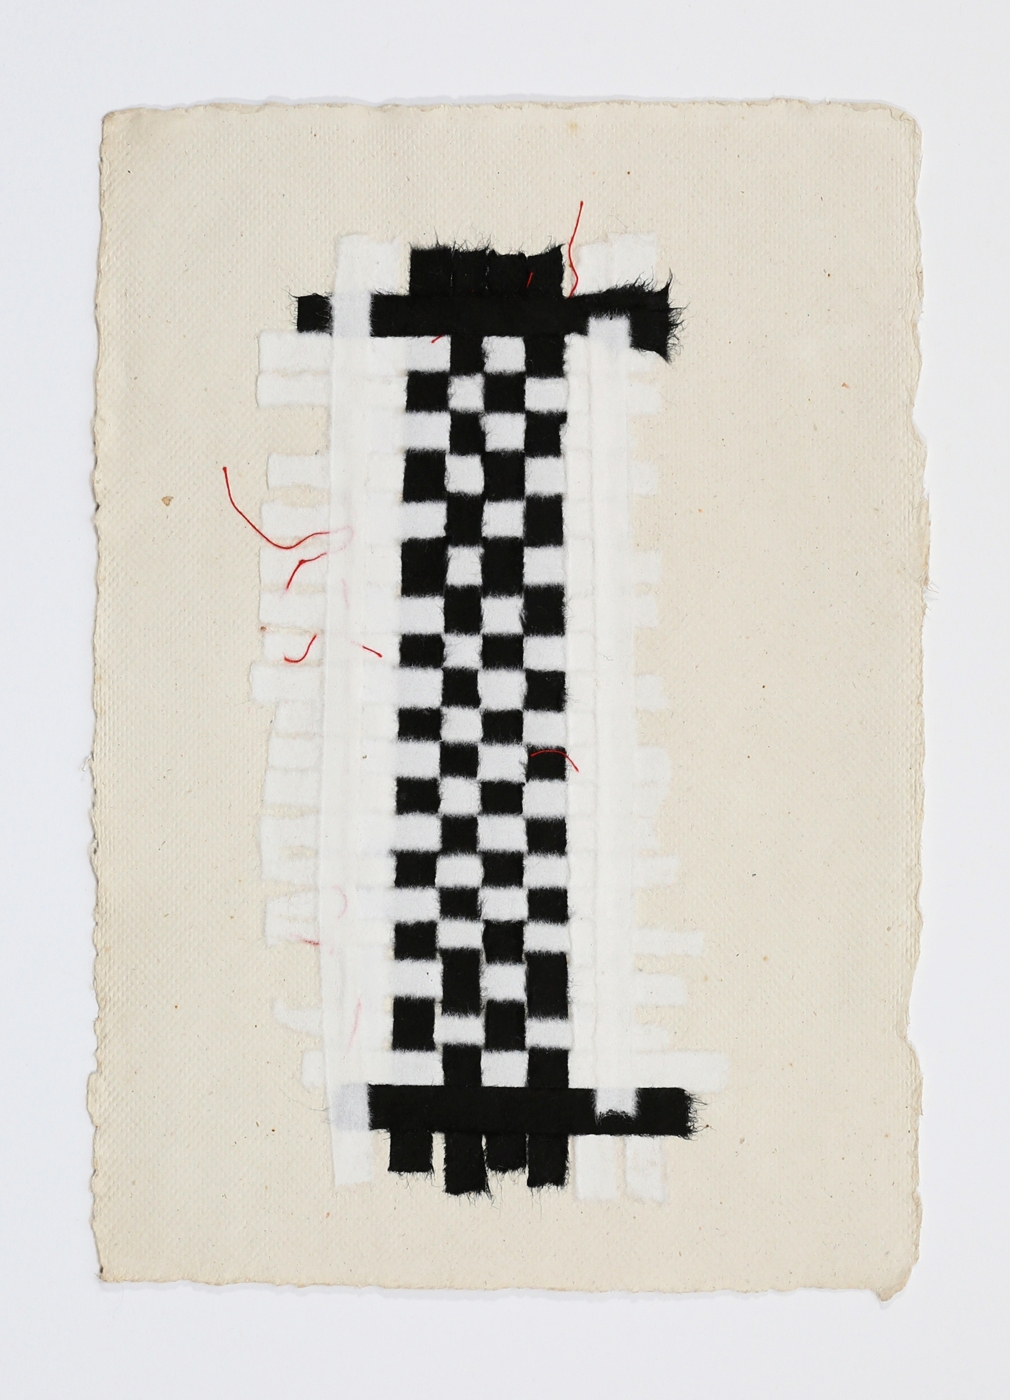  Black and White Weaving with Red Thread. 2015. Paper, Glue and Thread. 13" x 10" 